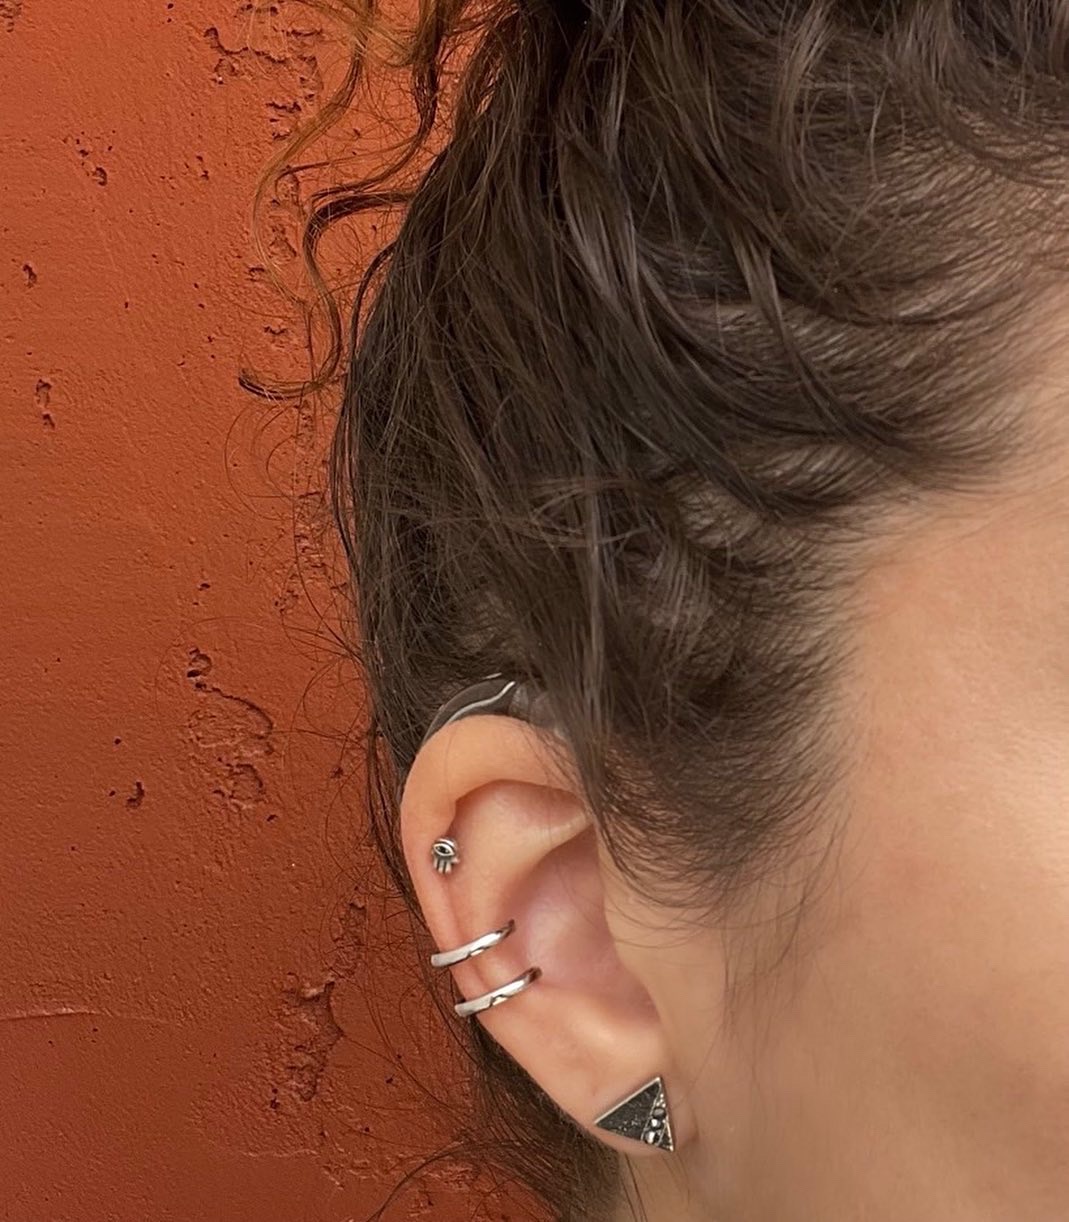 Hearing aid jewelry - Deafmeal makes stylish safety rings and holsters